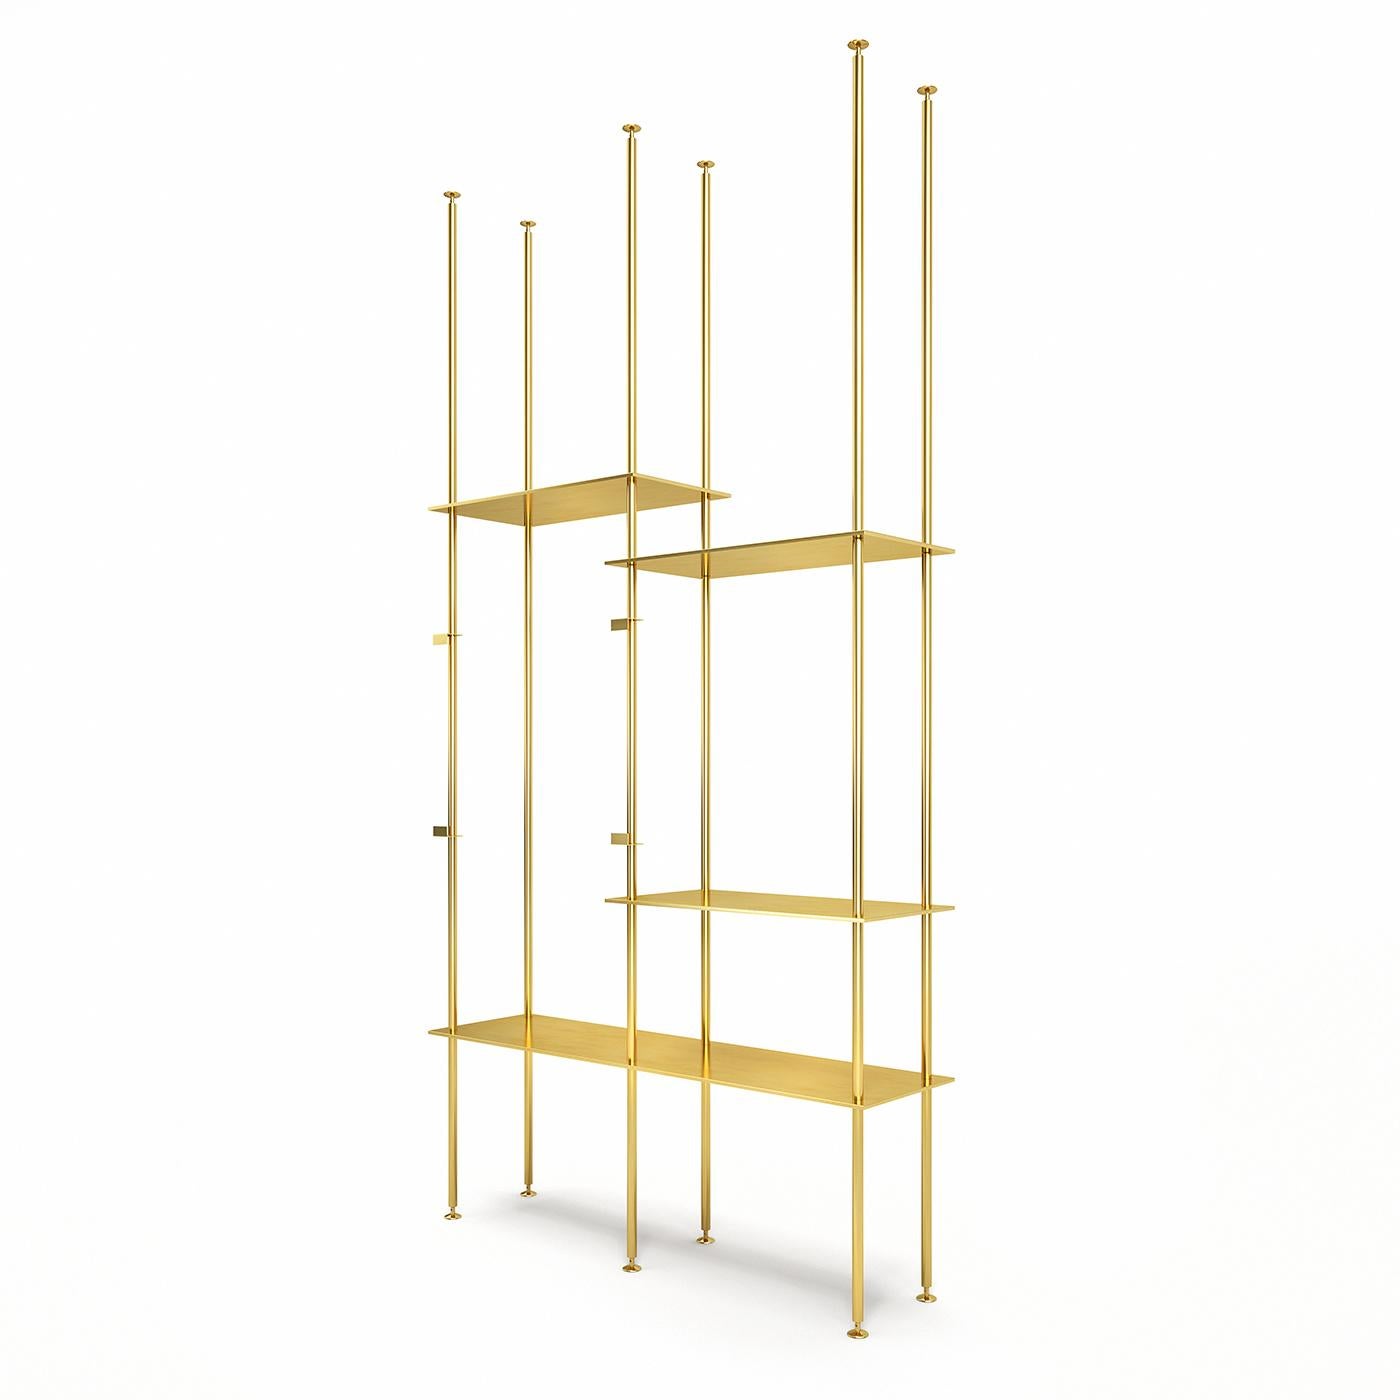 Lightweight and luminous best define the character of this floor-to-ceiling bookcase in polished brass, whose asymmetrical design has no visible joints. The final height of the design will be determined by the height of the room where it will be